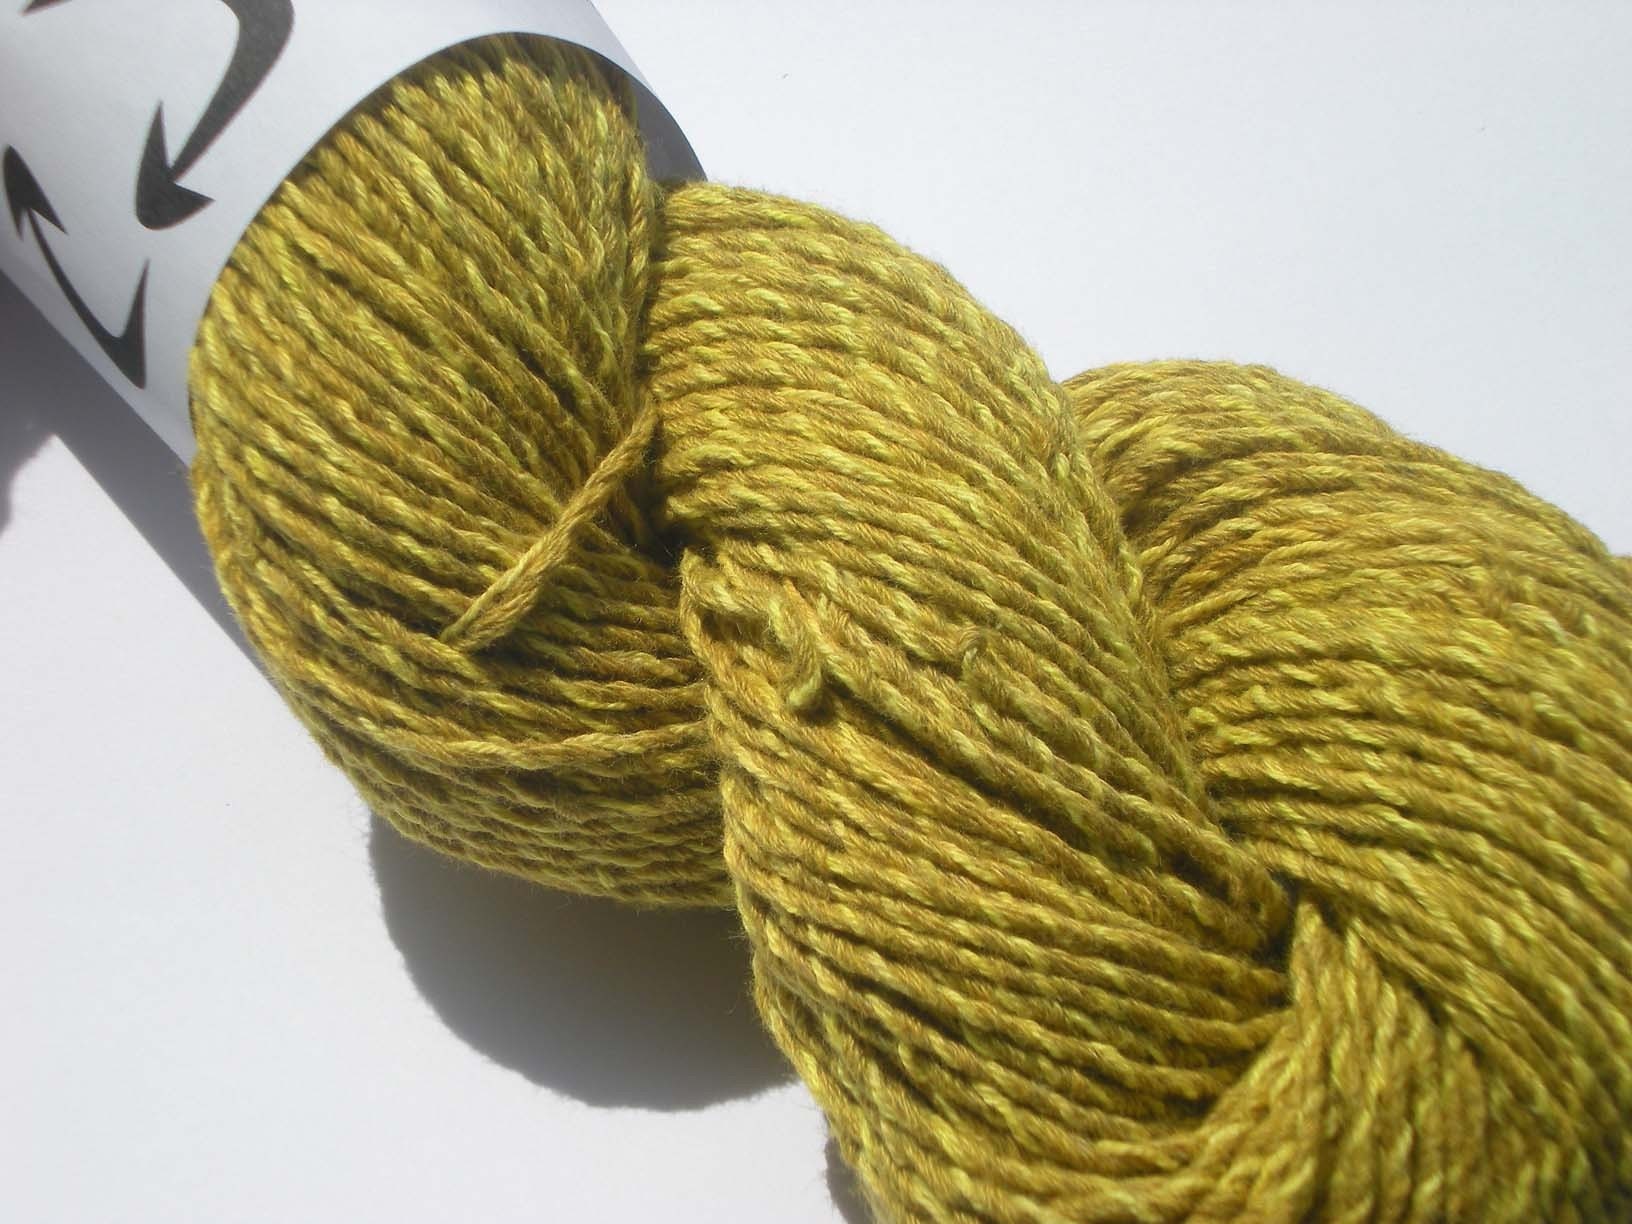 Hand Dyed, Recycled, Respun Cotton Yarn, Worsted Weight, 160 Yards No. 109